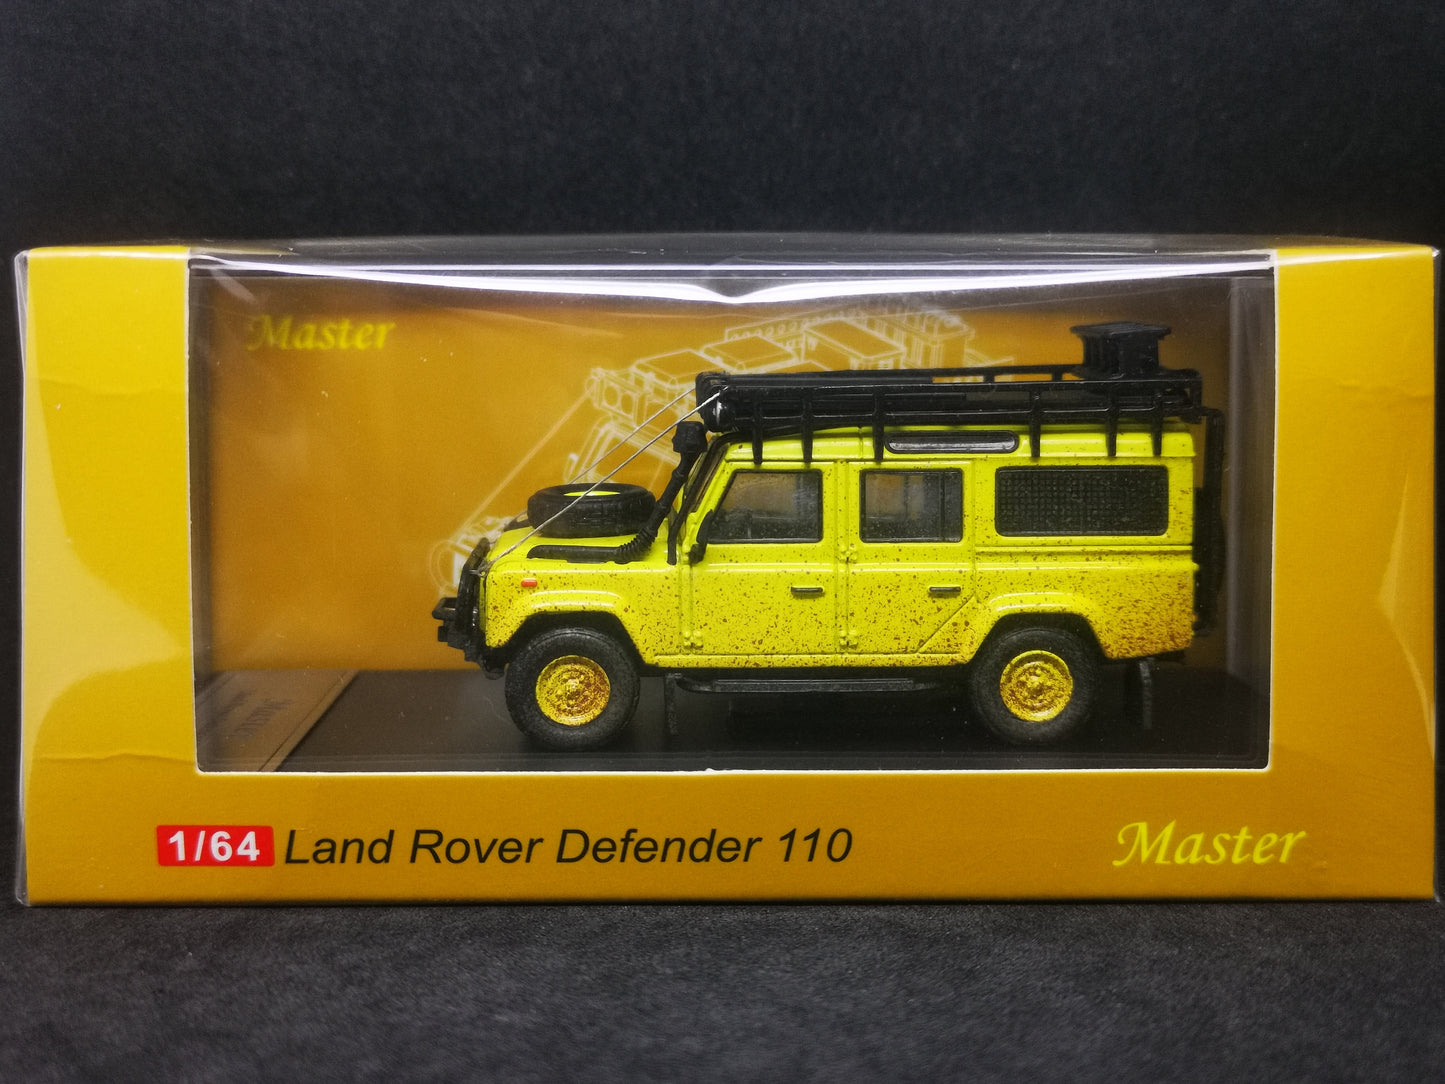 Master Model 1:64 Scale Camel Trophy Land Rover Defender 110 Dirty Ver. With Off Road Kits